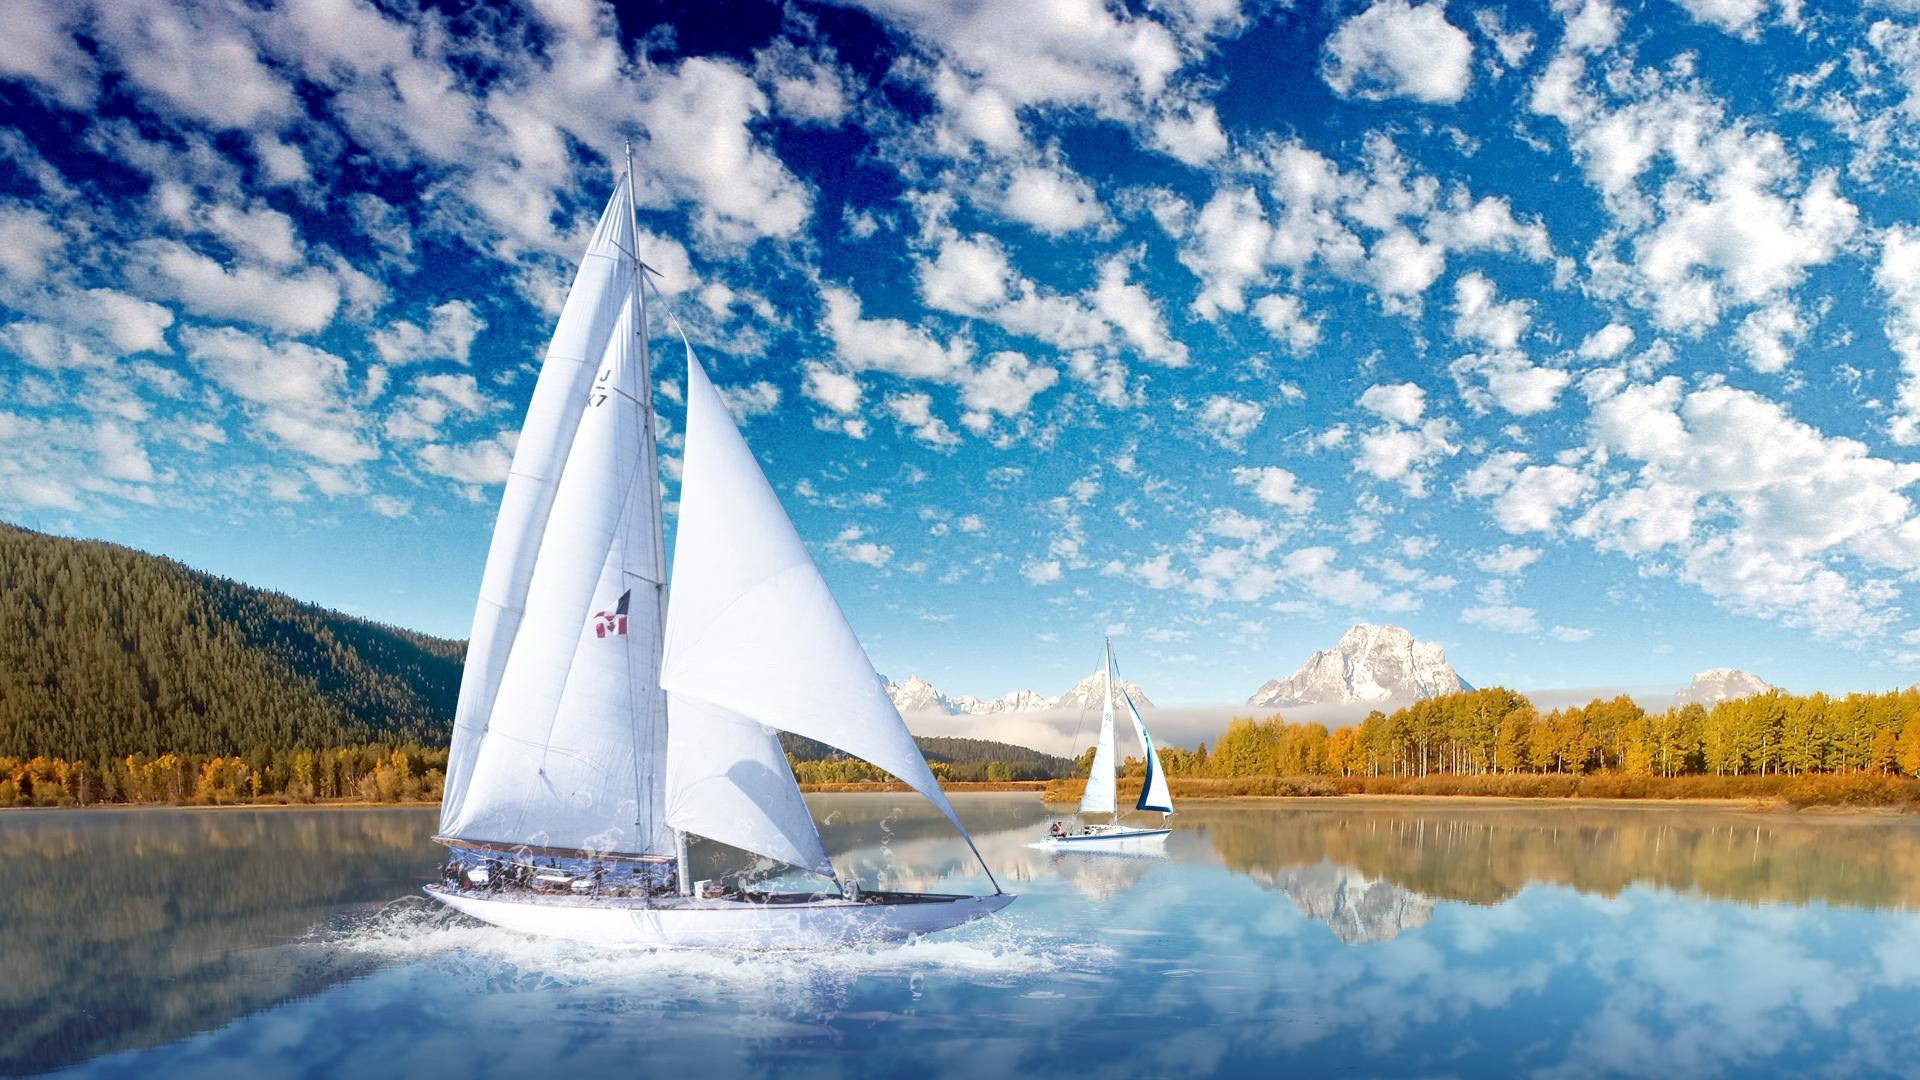 Background High Definition Lake And Sailing Scenic 37102s